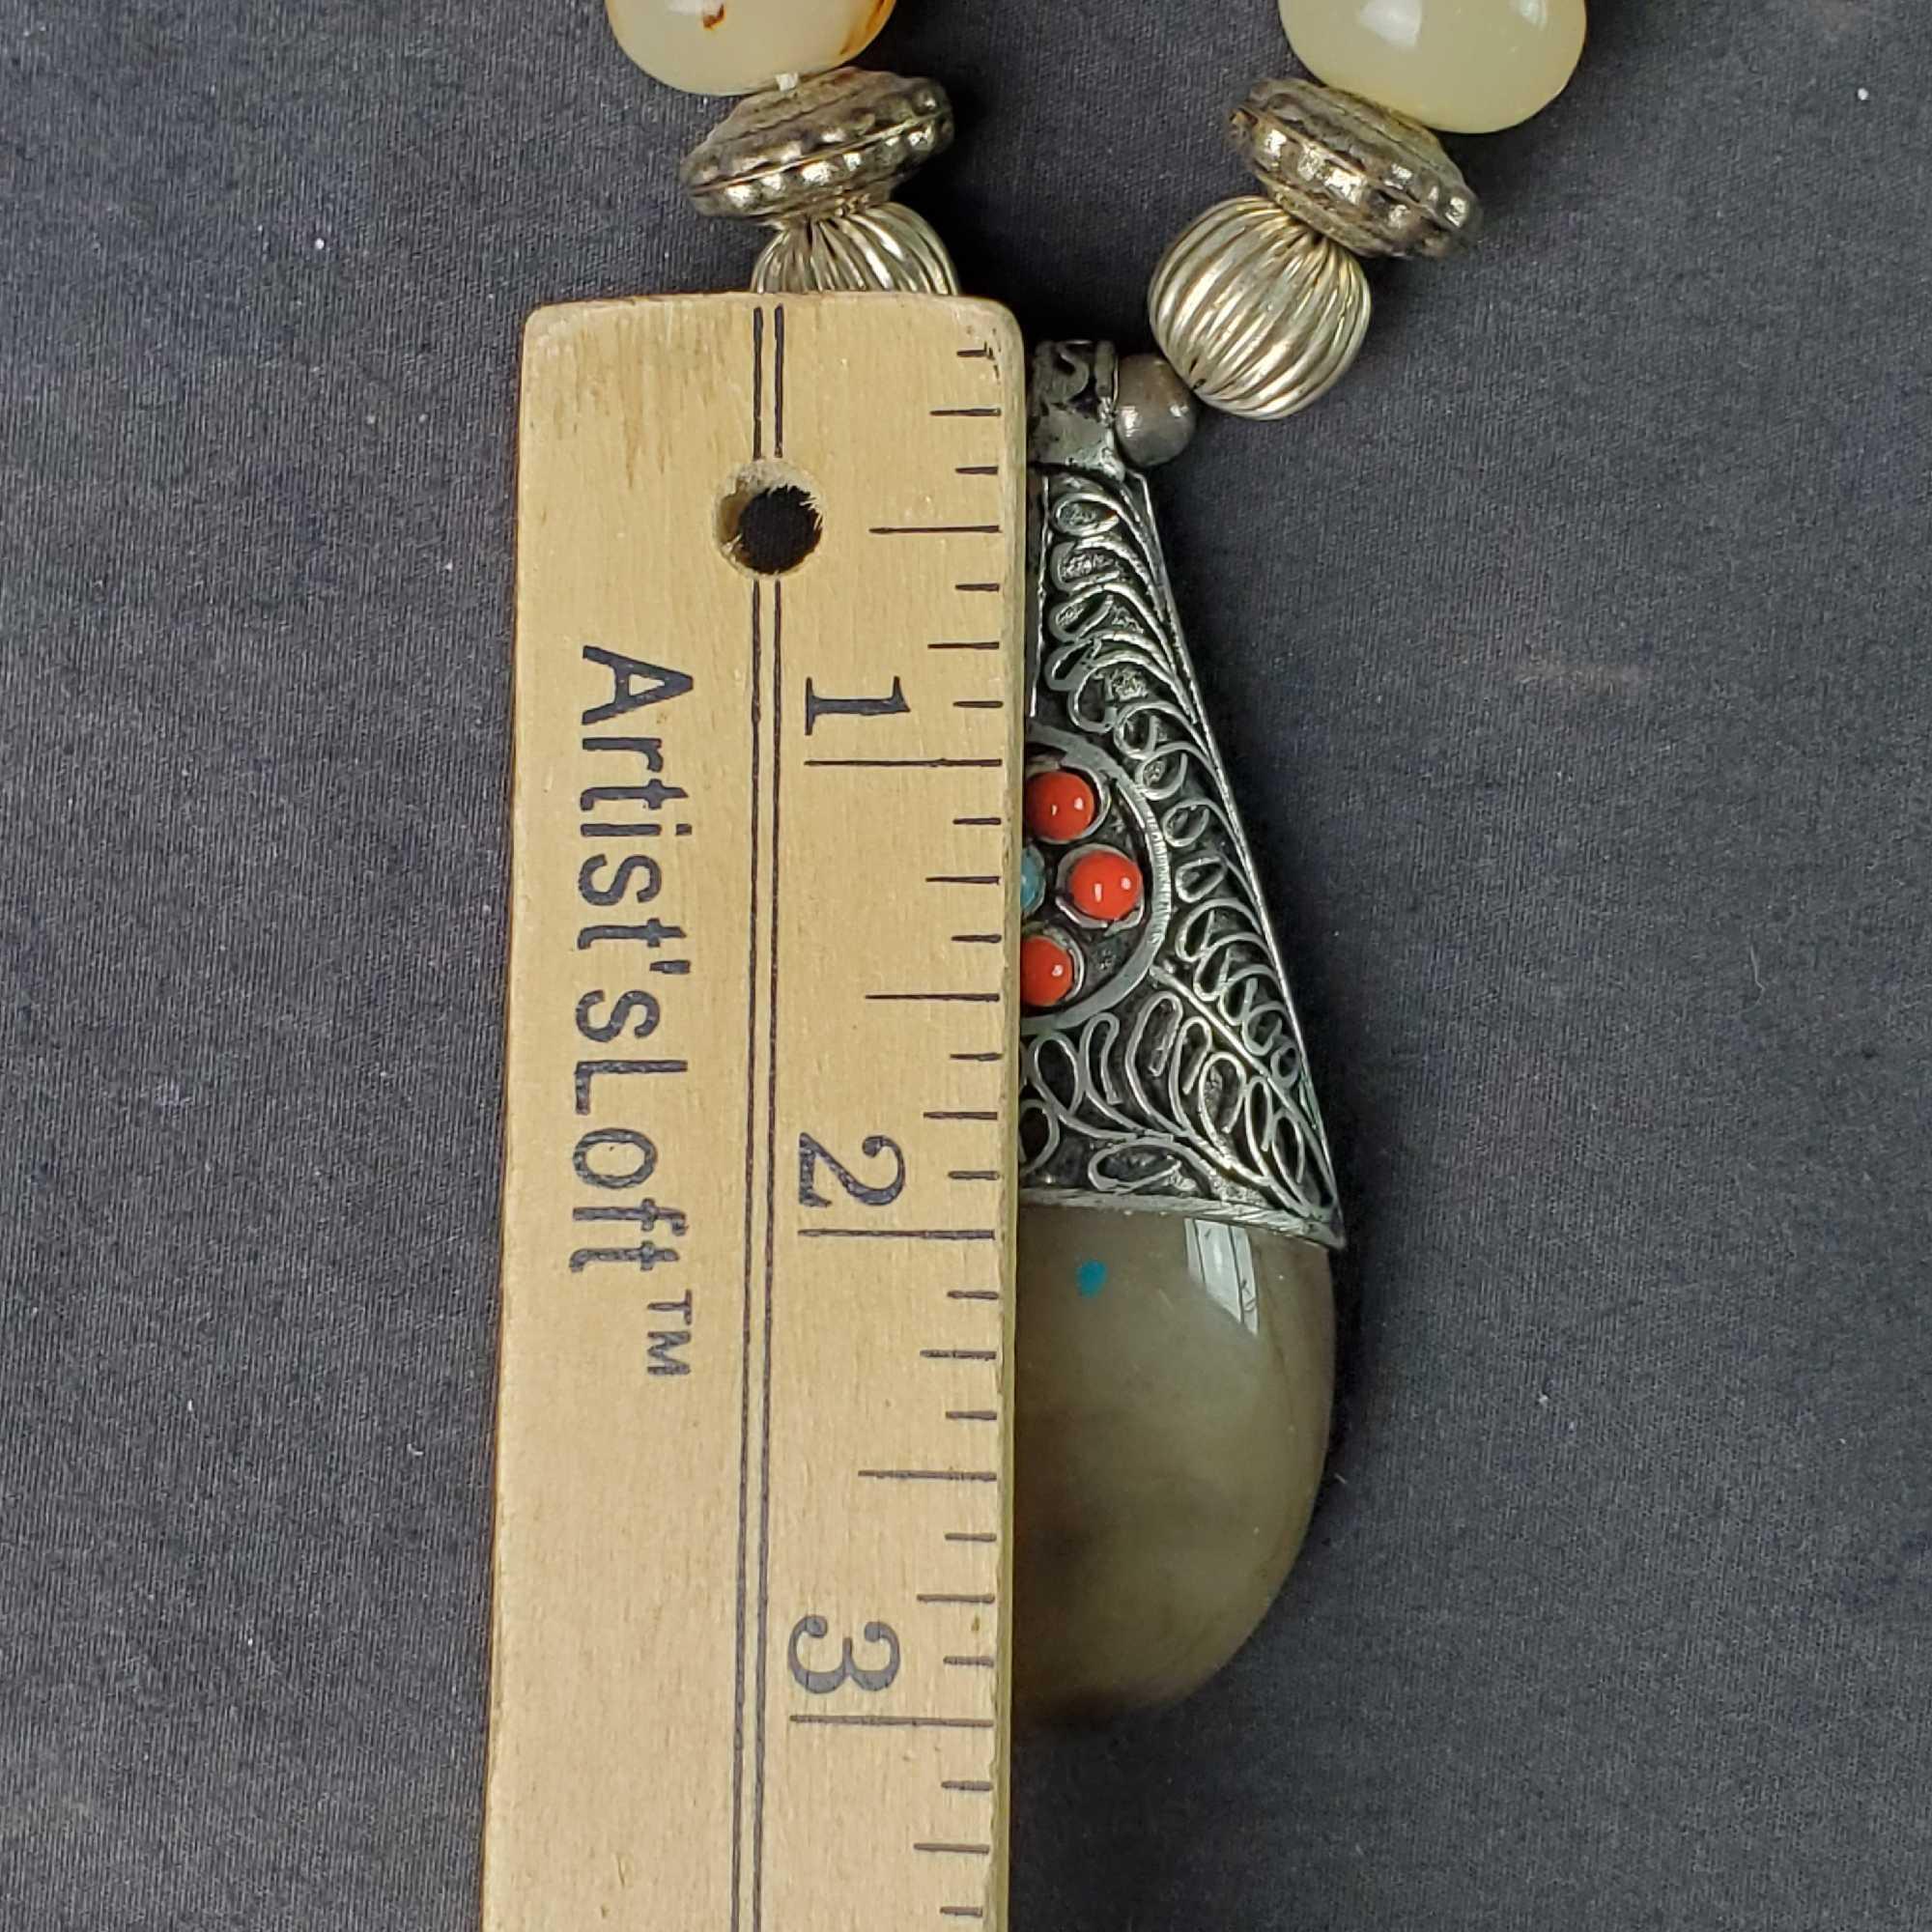 Unique beaded and shell disc necklace with large stone like pendant